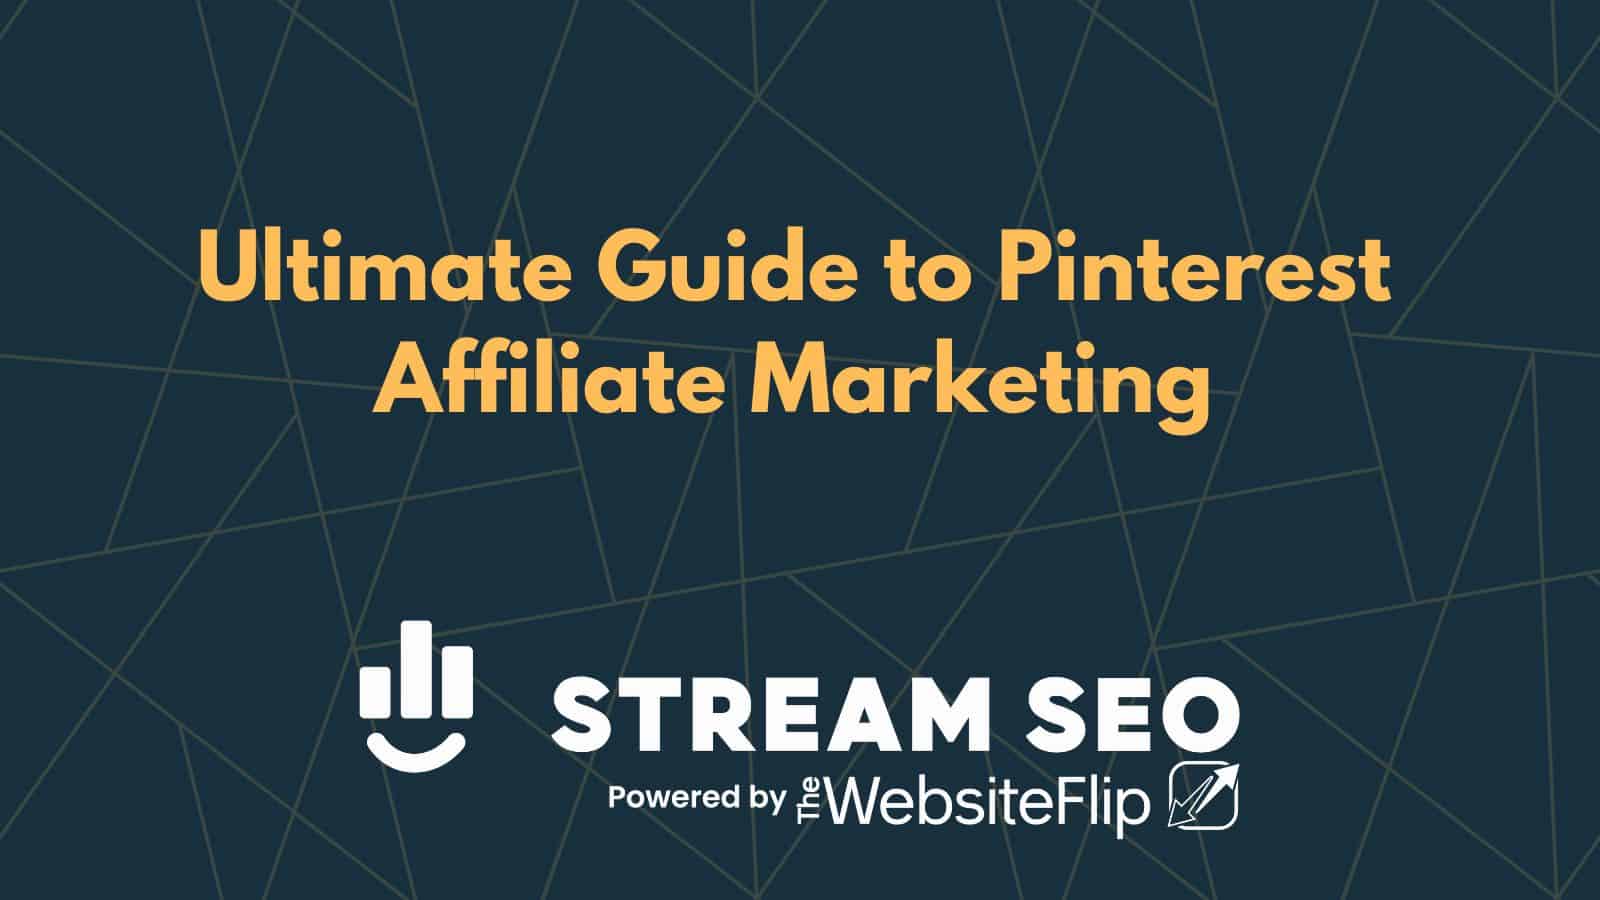 Ultimate Guide to Pinterest Affiliate Marketing